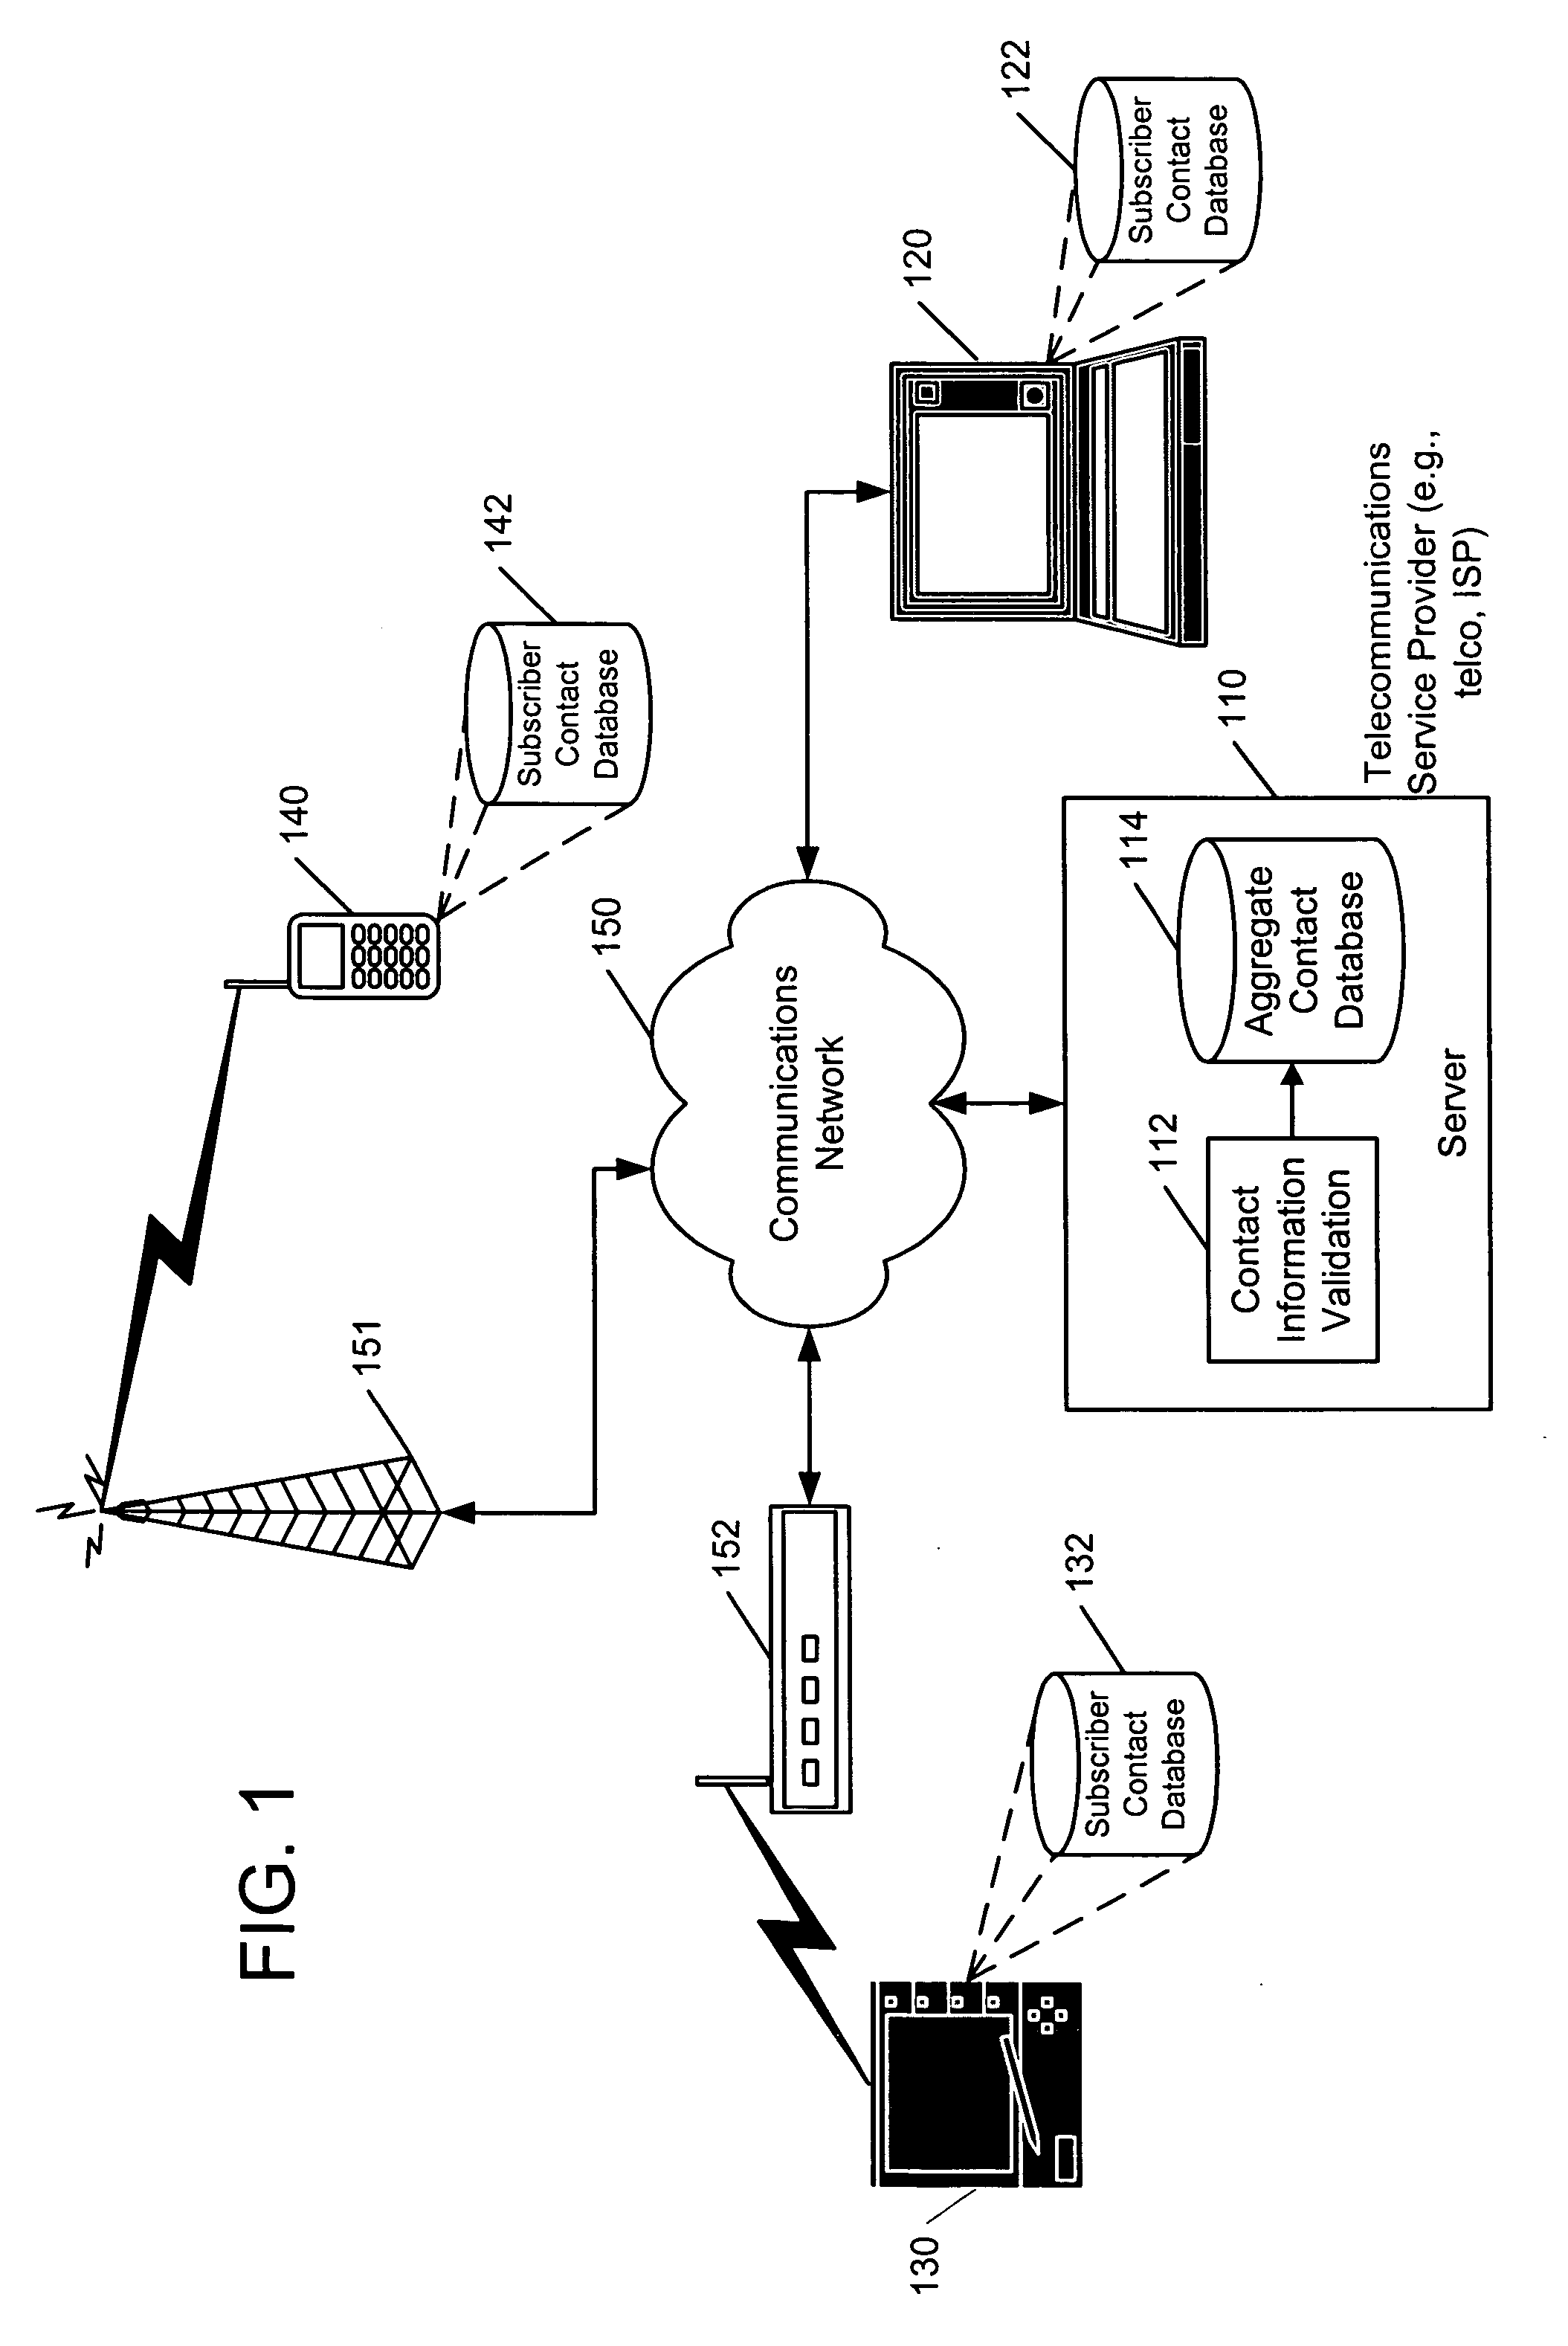 Systems, methods and computer program products for aggregating contact information